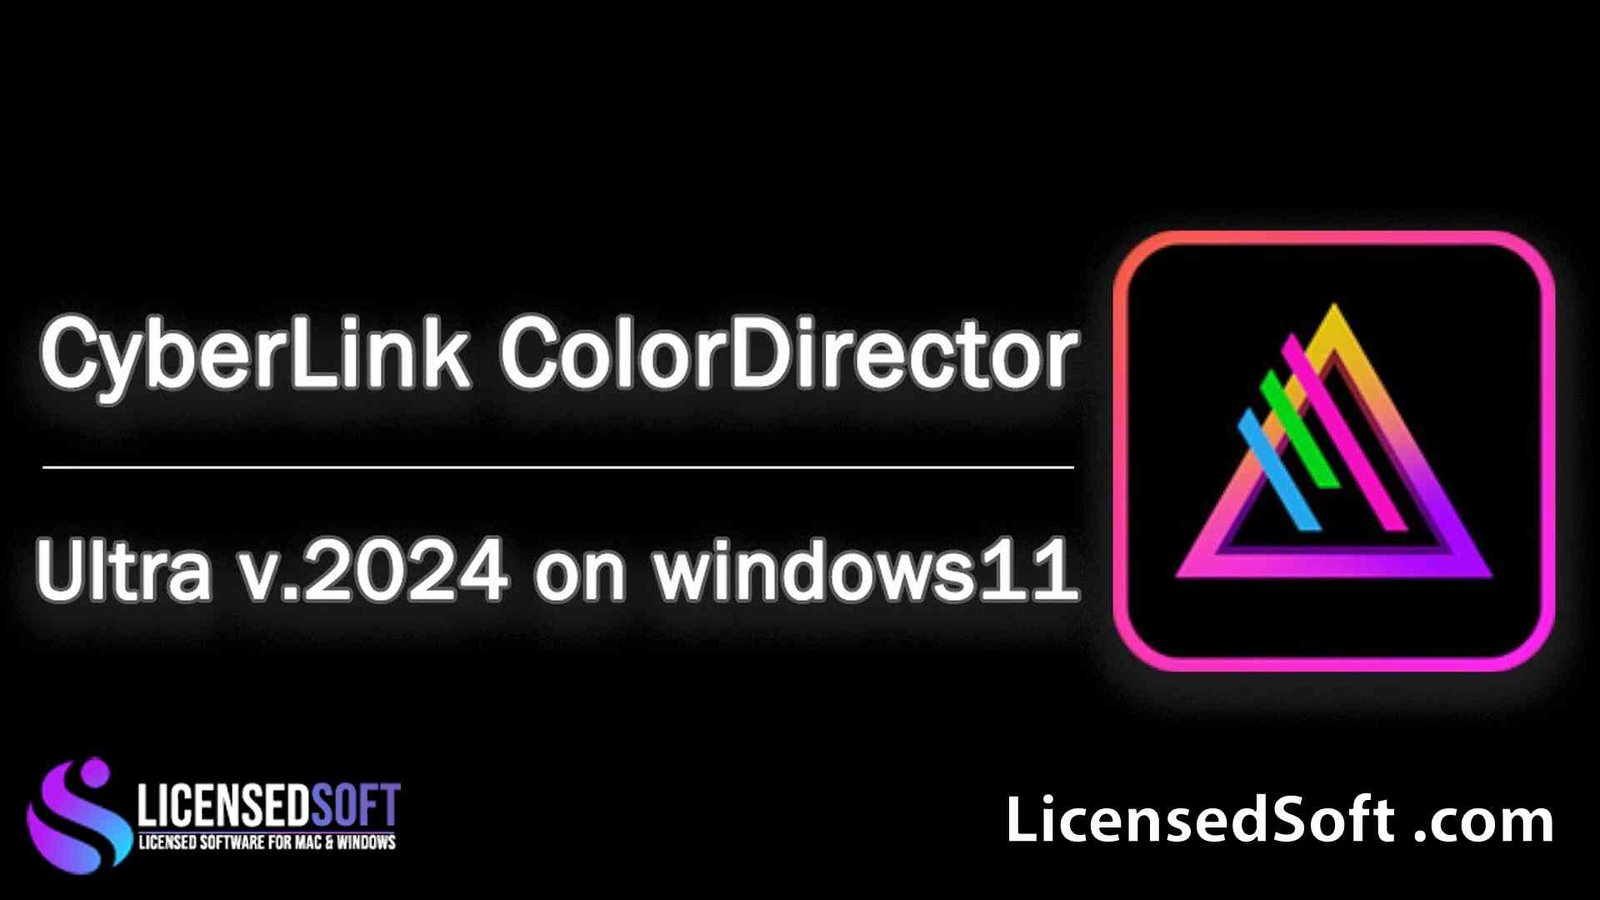 CyberLink ColorDirector Ultra 2024 Full Version By LicensedSoft